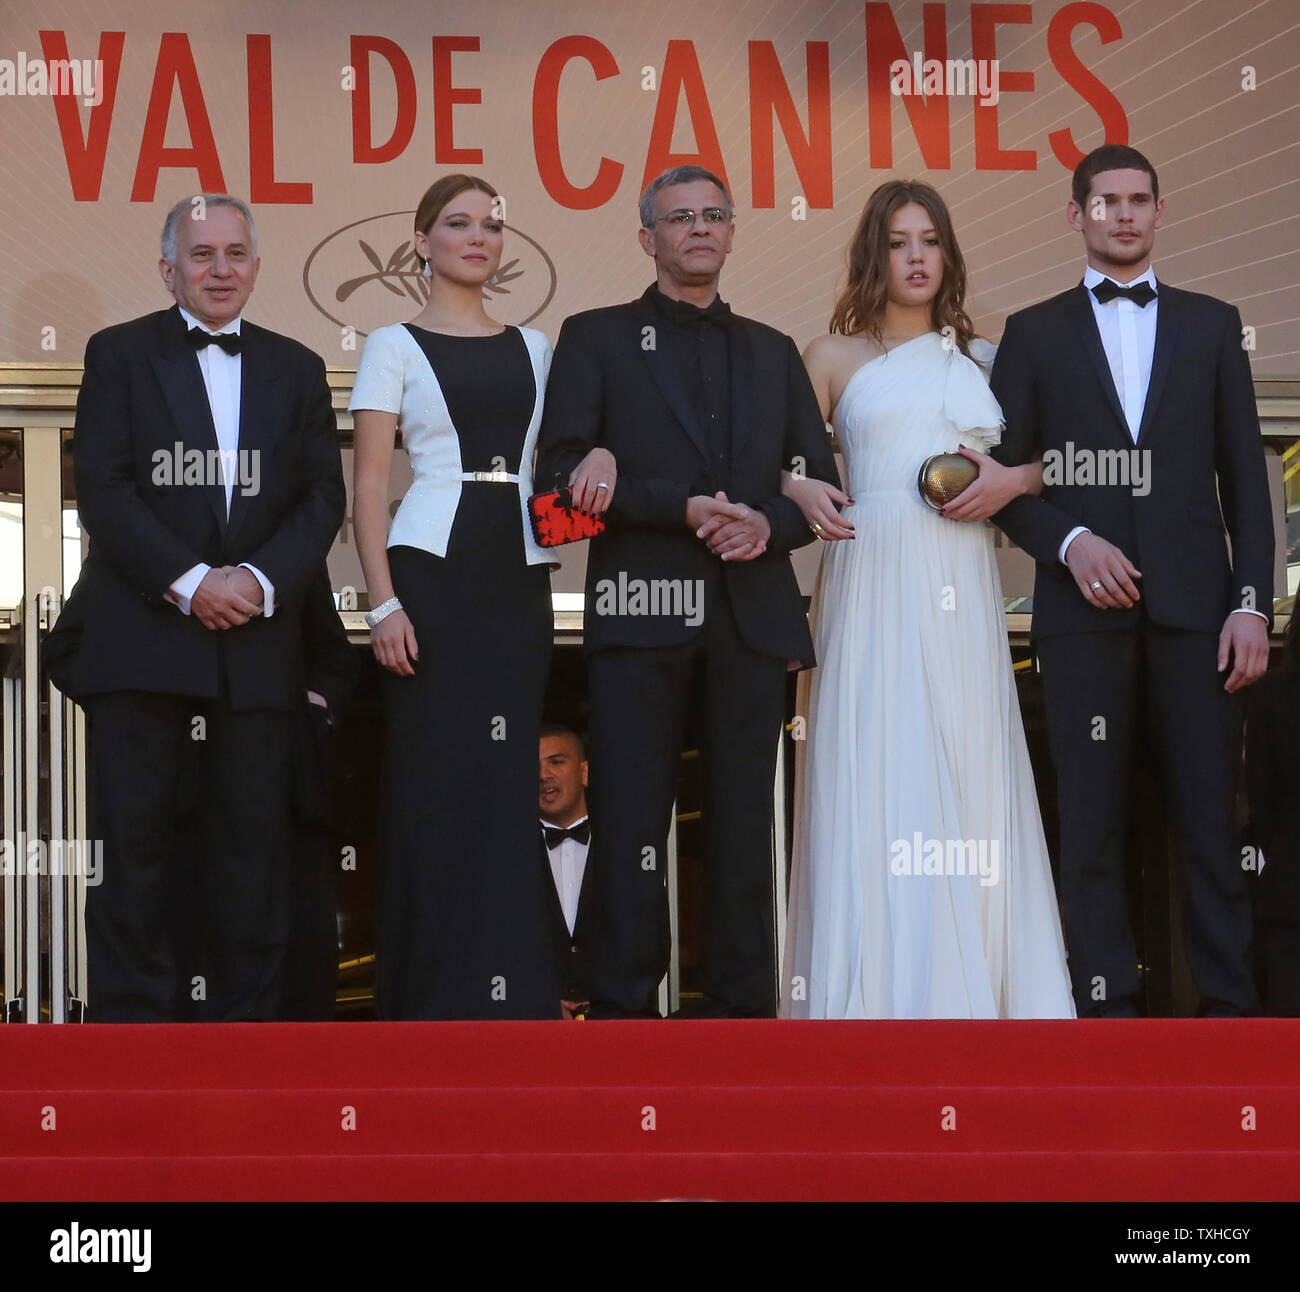 (From L to R) Brahim Chioua, Lea Seydoux, Abdellatif Kechiche, Adele Exarchopoulos and Jeremie Laheurte arrive on the steps of the Palais des Festivals before the screening of the film 'Zulu' during the 66th annual Cannes International Film Festival in Cannes, France on May 26, 2013.  UPI/David Silpa Stock Photo